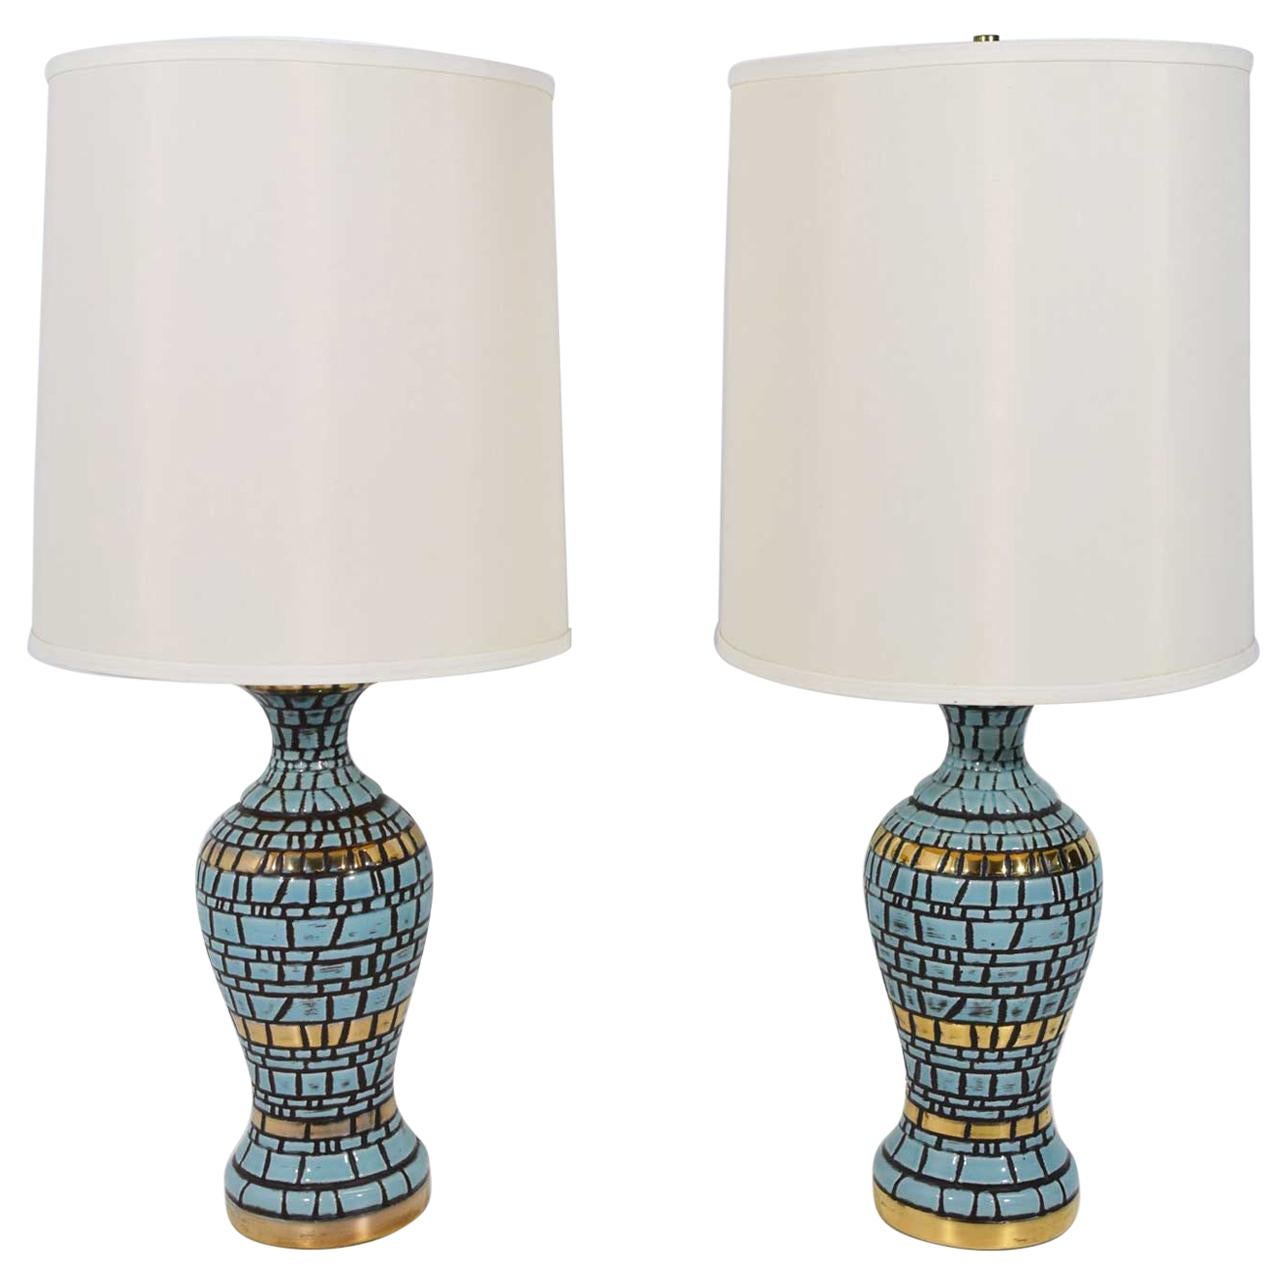 Midcentury Ceramic Tiled Lamps in Turquoise and Gold